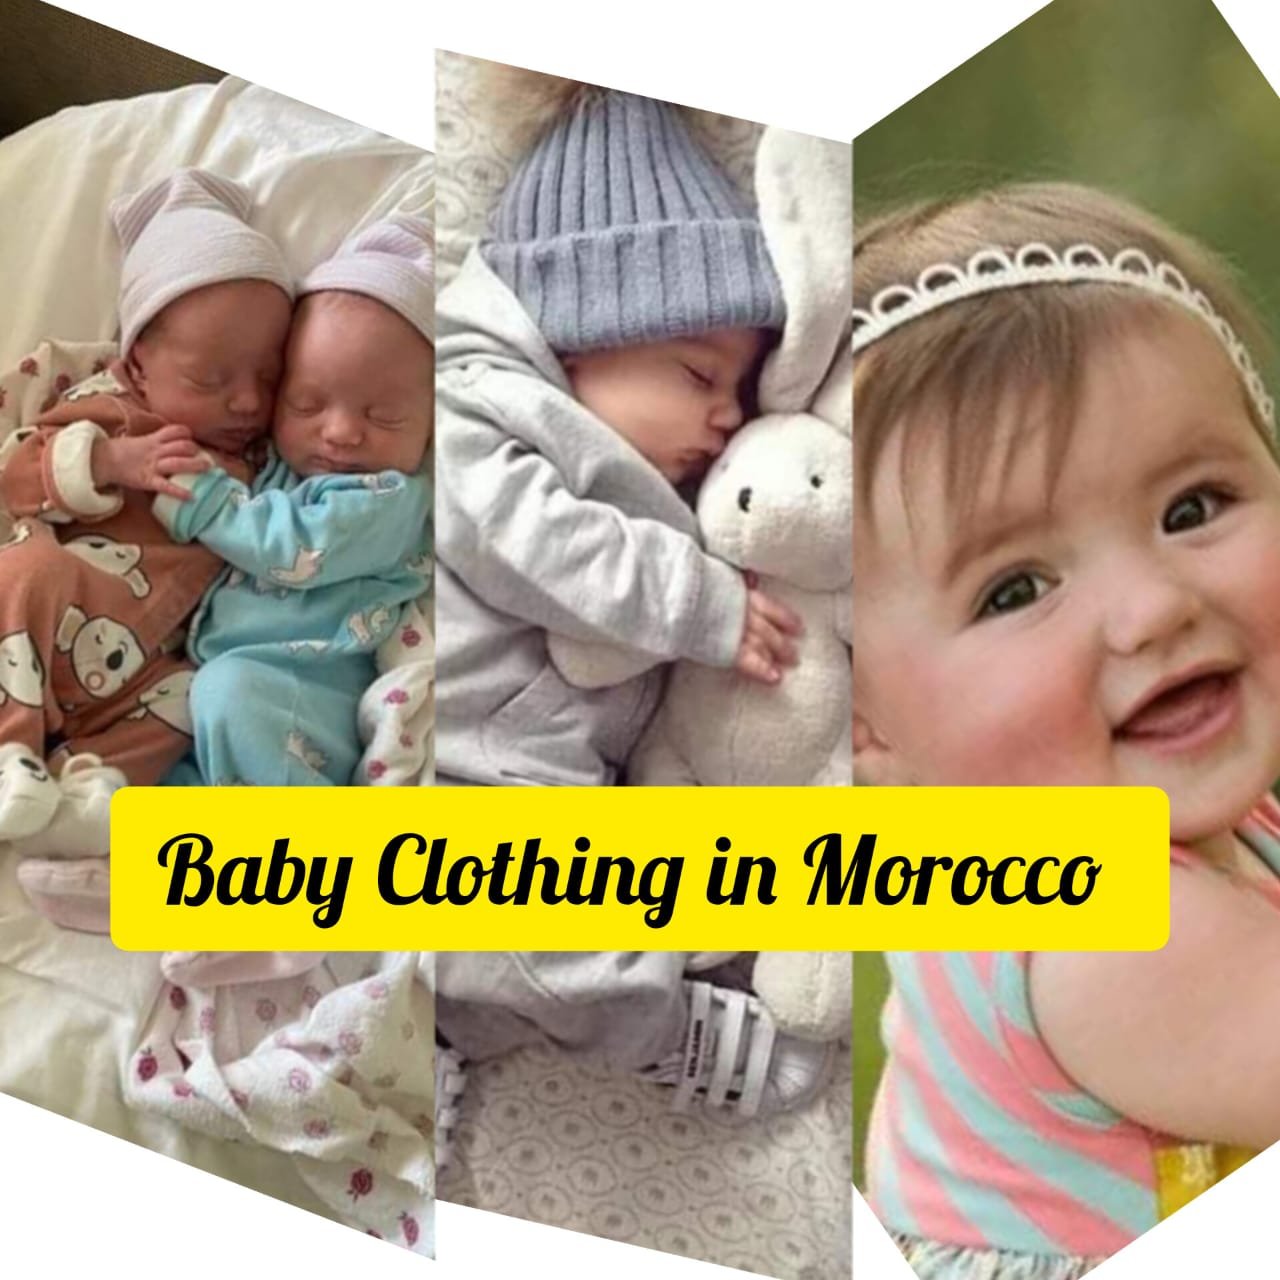 10 Most Famous BABY CLOTHING BRAND IN MOROCCO